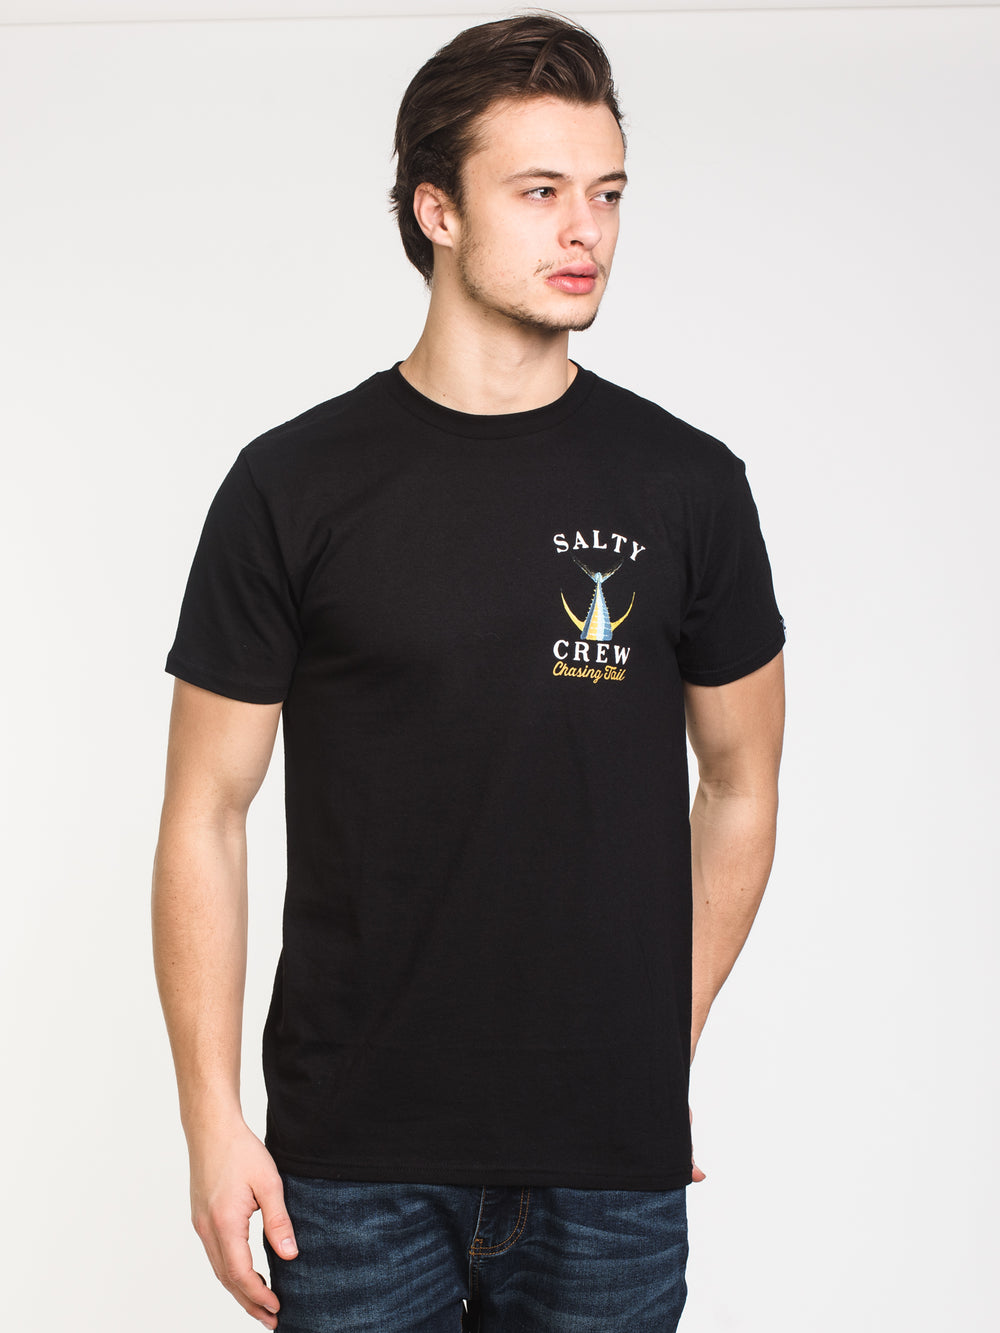 SALTY CREW TAILED T-SHIRT - CLEARANCE